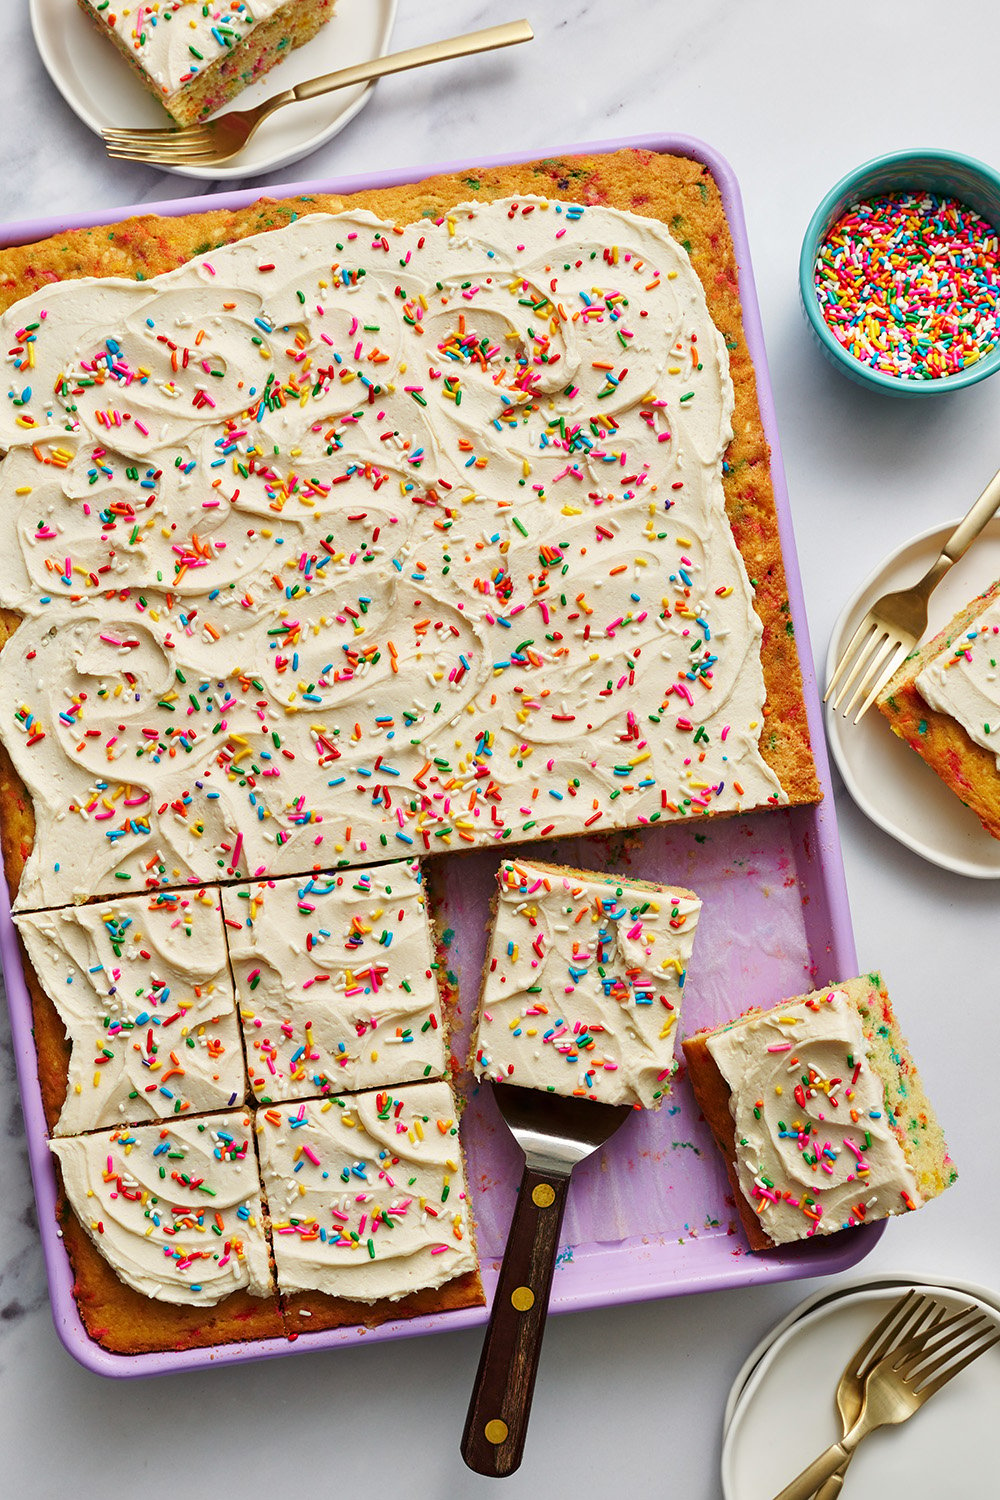 the funfetti sheet cake in a purple baking pan, being sliced up to serve.